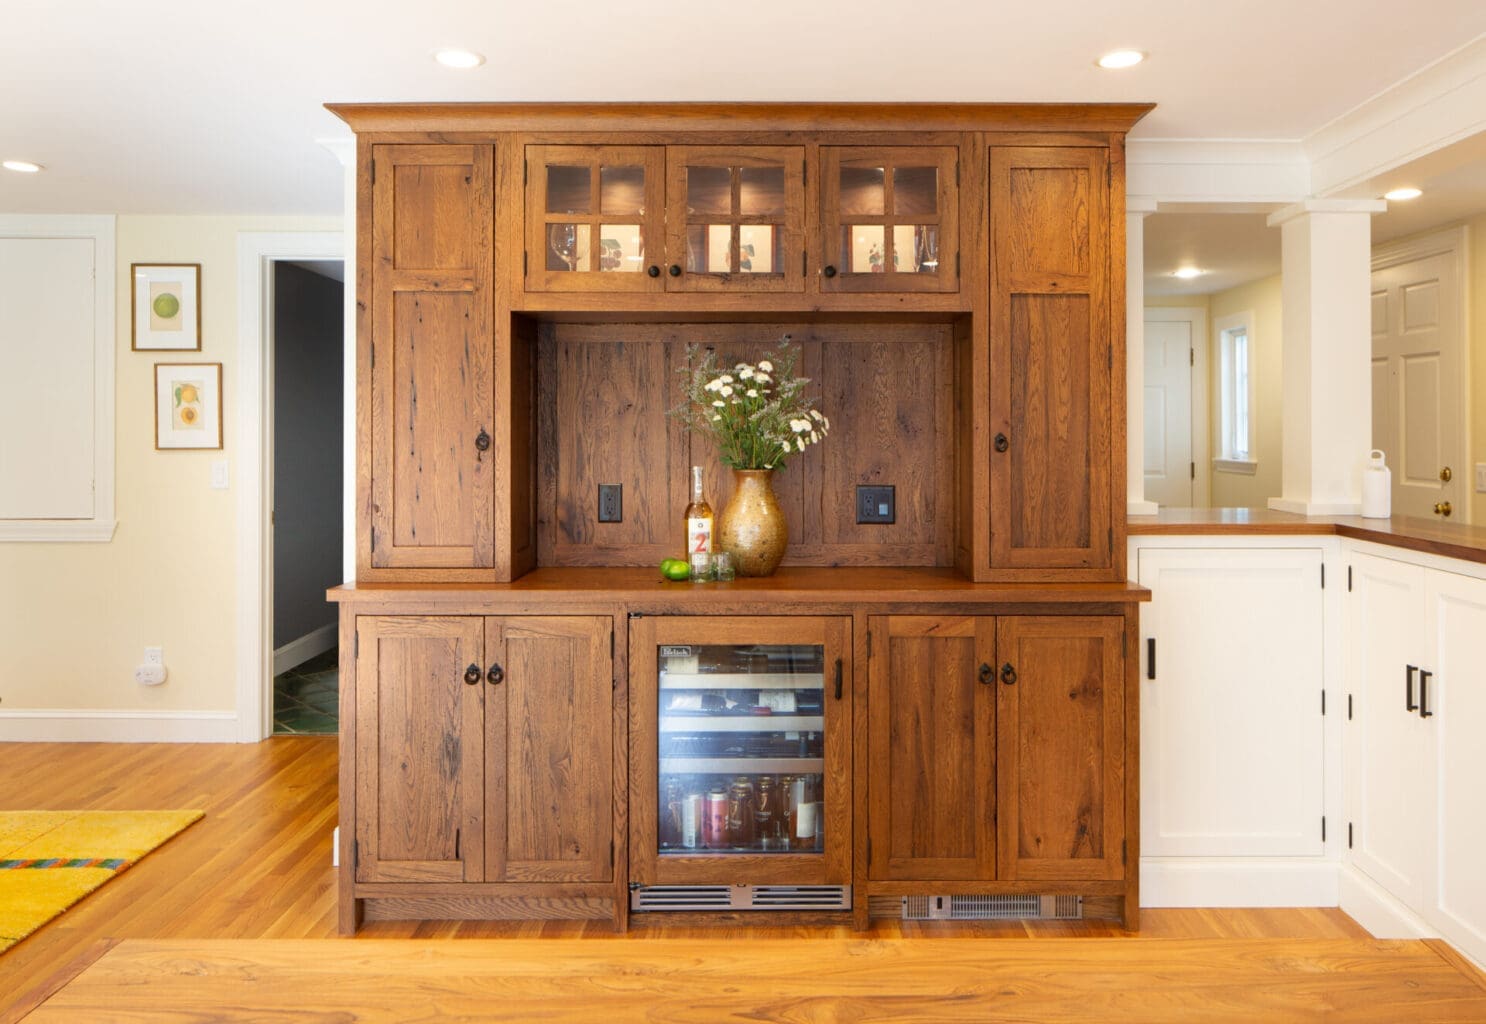 A photo of a reclaimed wooden cabinet bar with overhead cabinets and a built-in mini fridge.